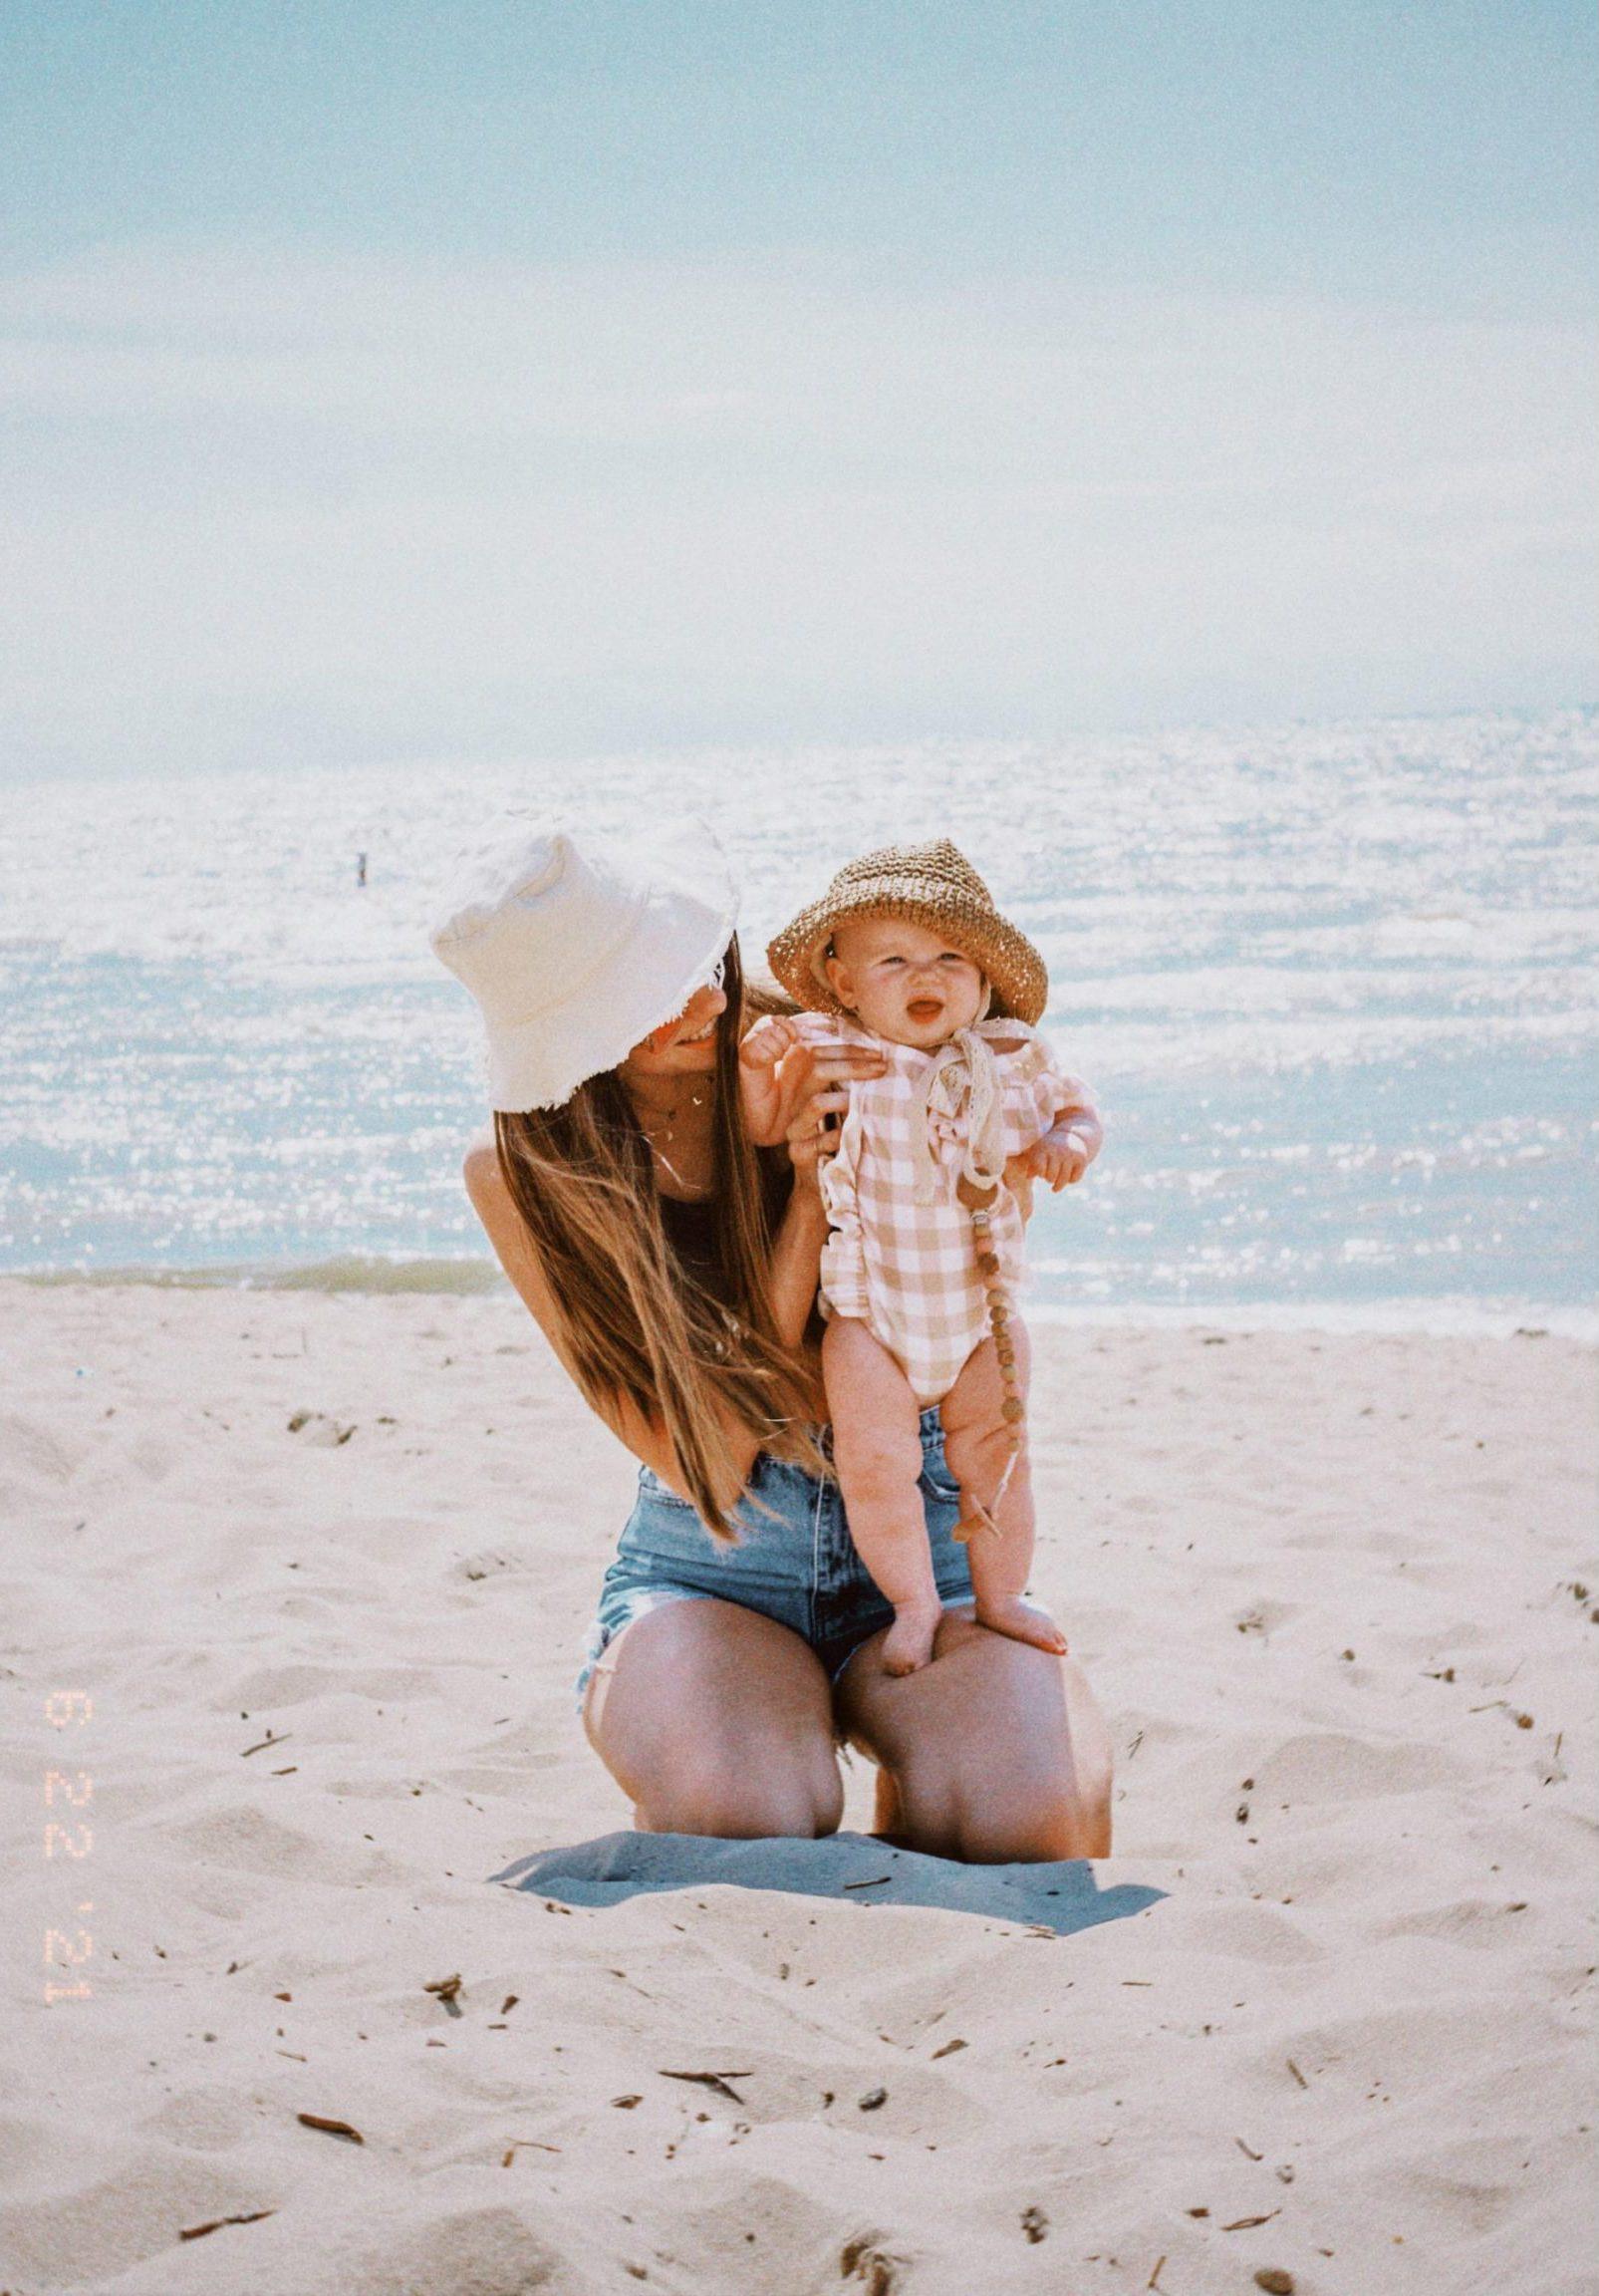 10 Ways I’ve Changed Since Becoming a Mother